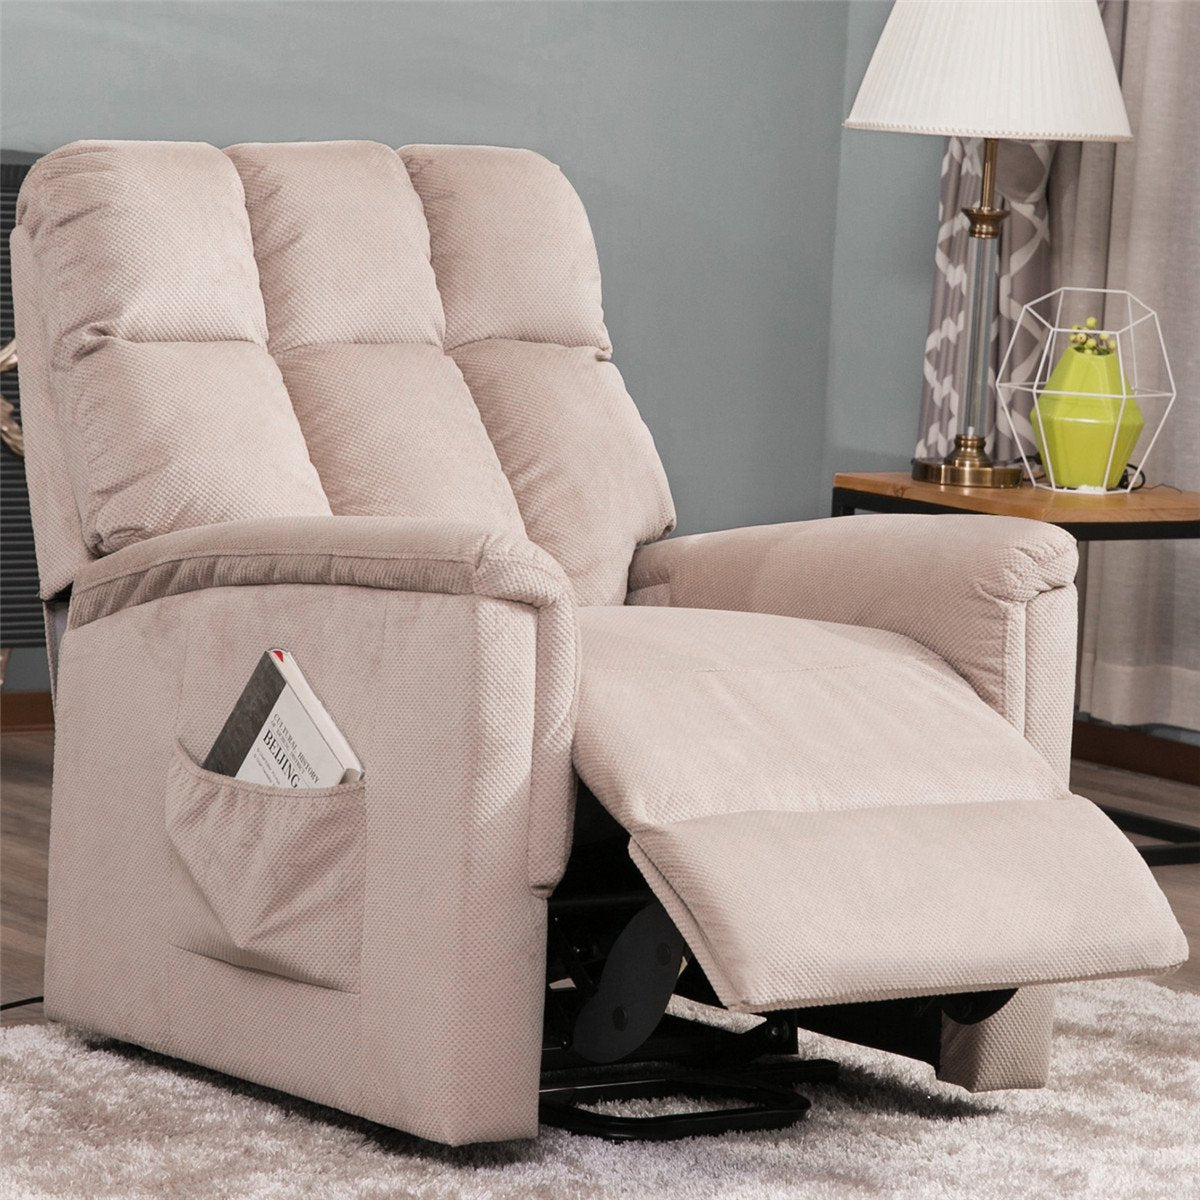 Power Lift Chair Soft Fabric Recliner Lounge Living Room Sofa with Remote Control